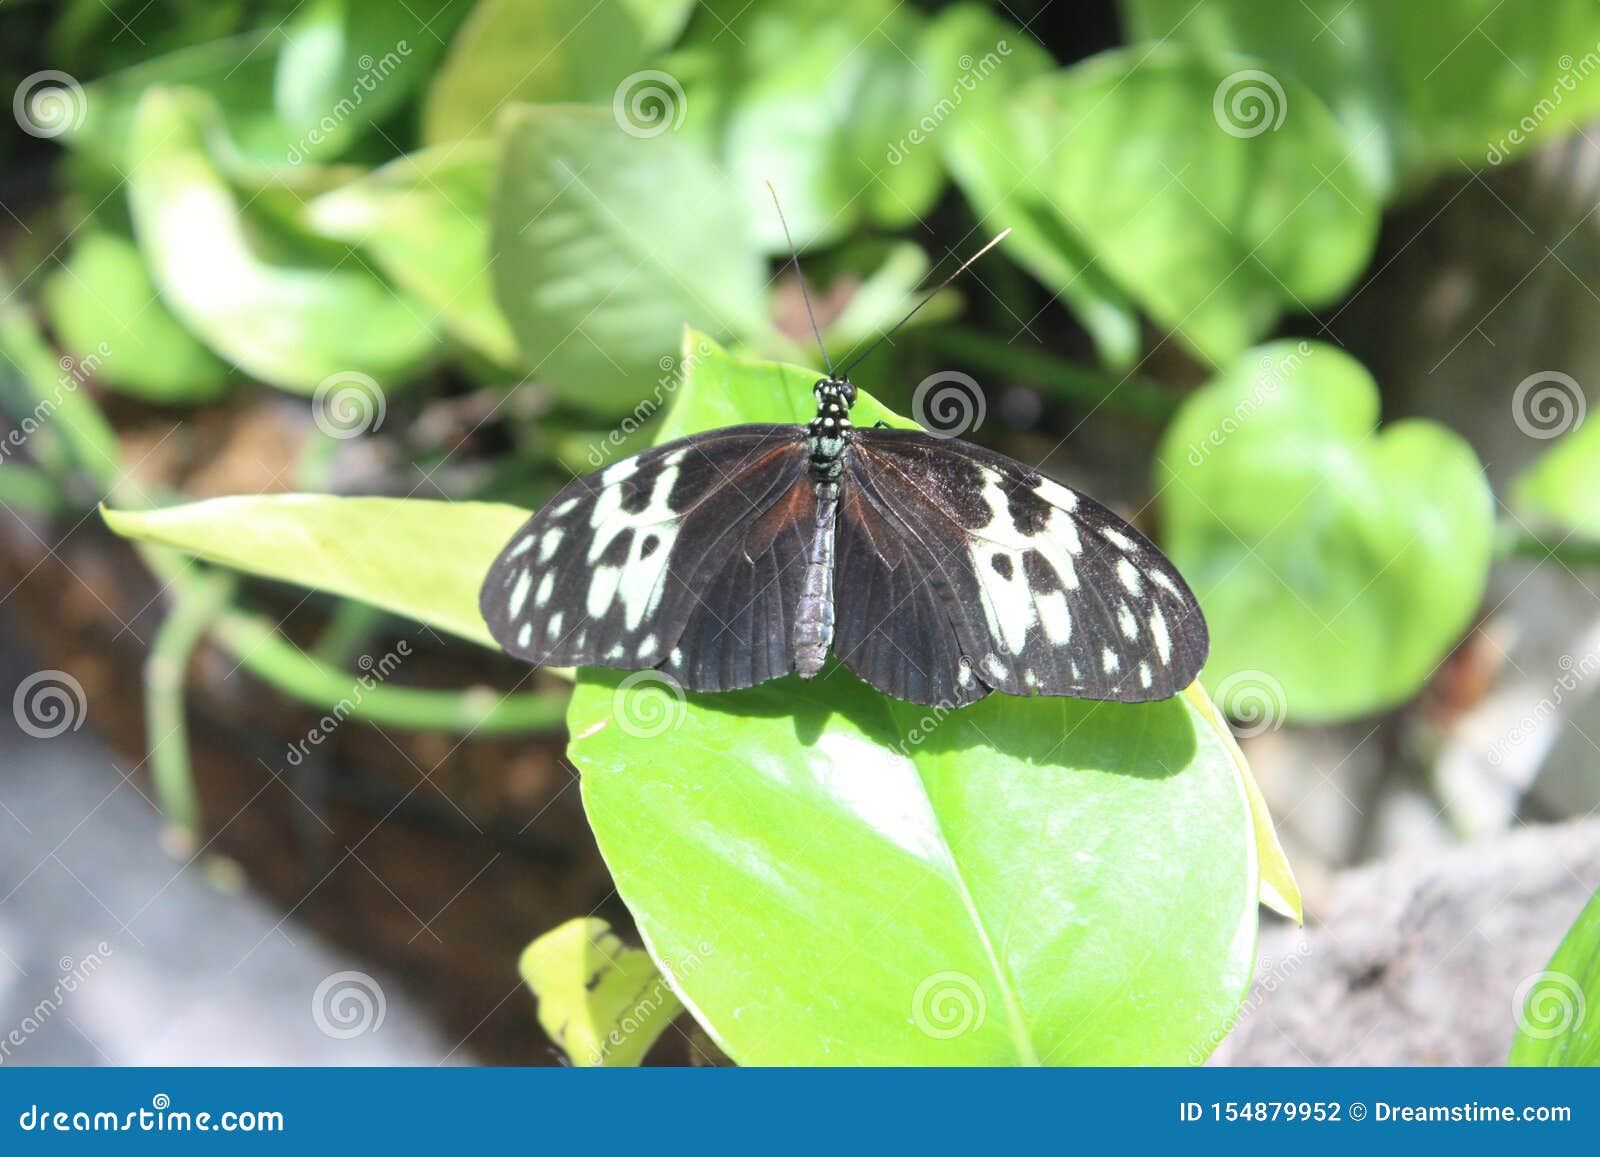 Butterfly Conservatory Near Niagara Falls In Canada Stock Photo - Image of butterflies, insect ...